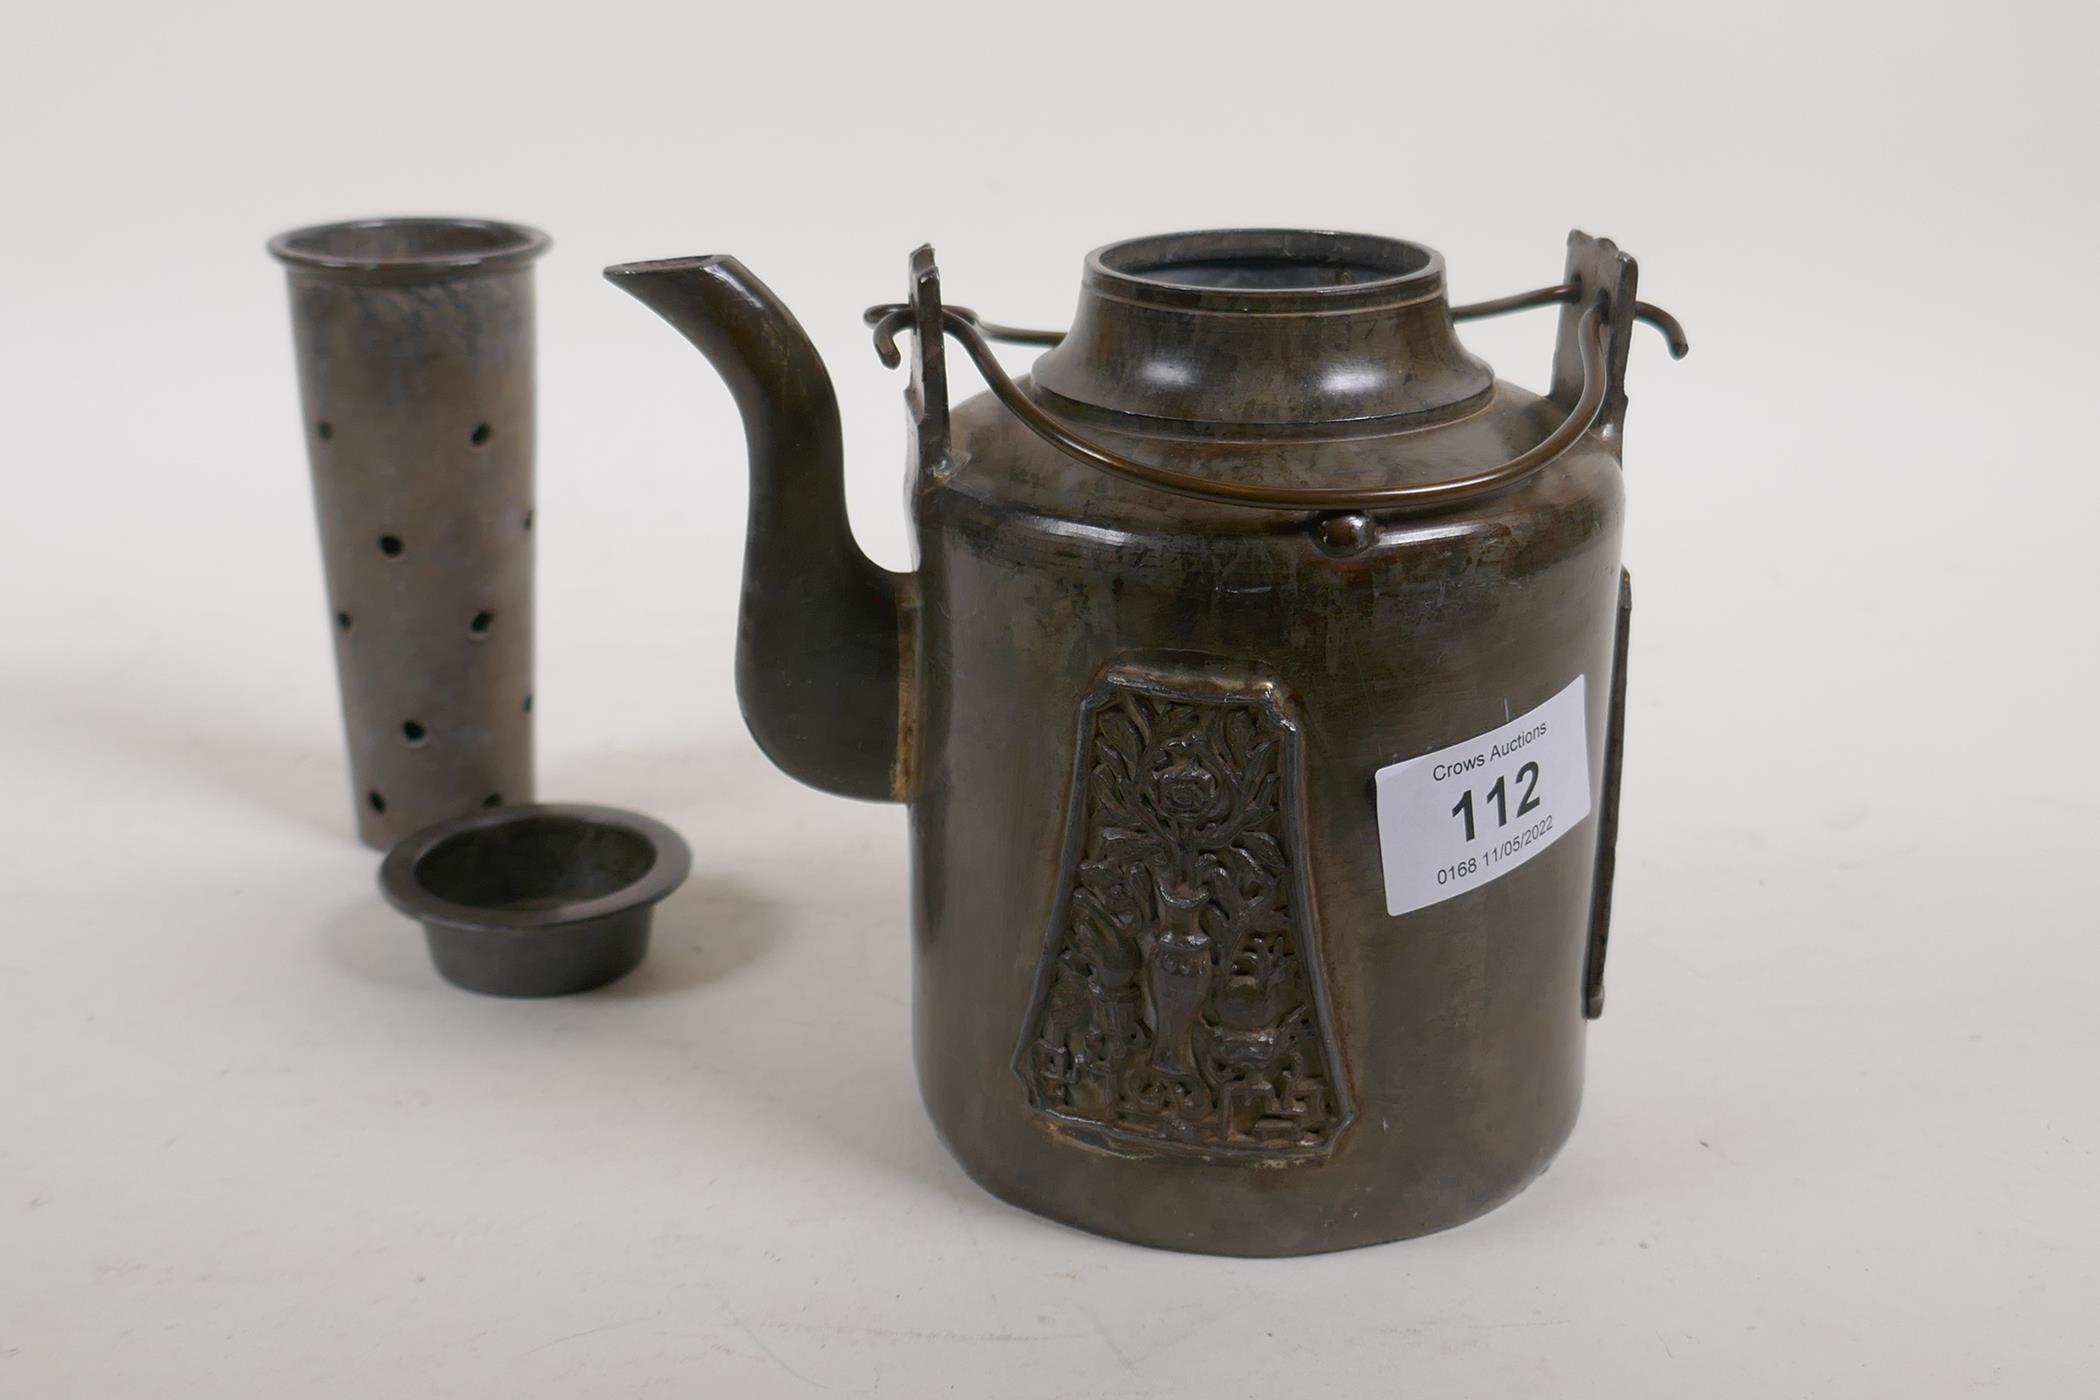 An antique Chinese pewter tea pot with applied decorative panels in relief and removable infuser/ - Image 6 of 6